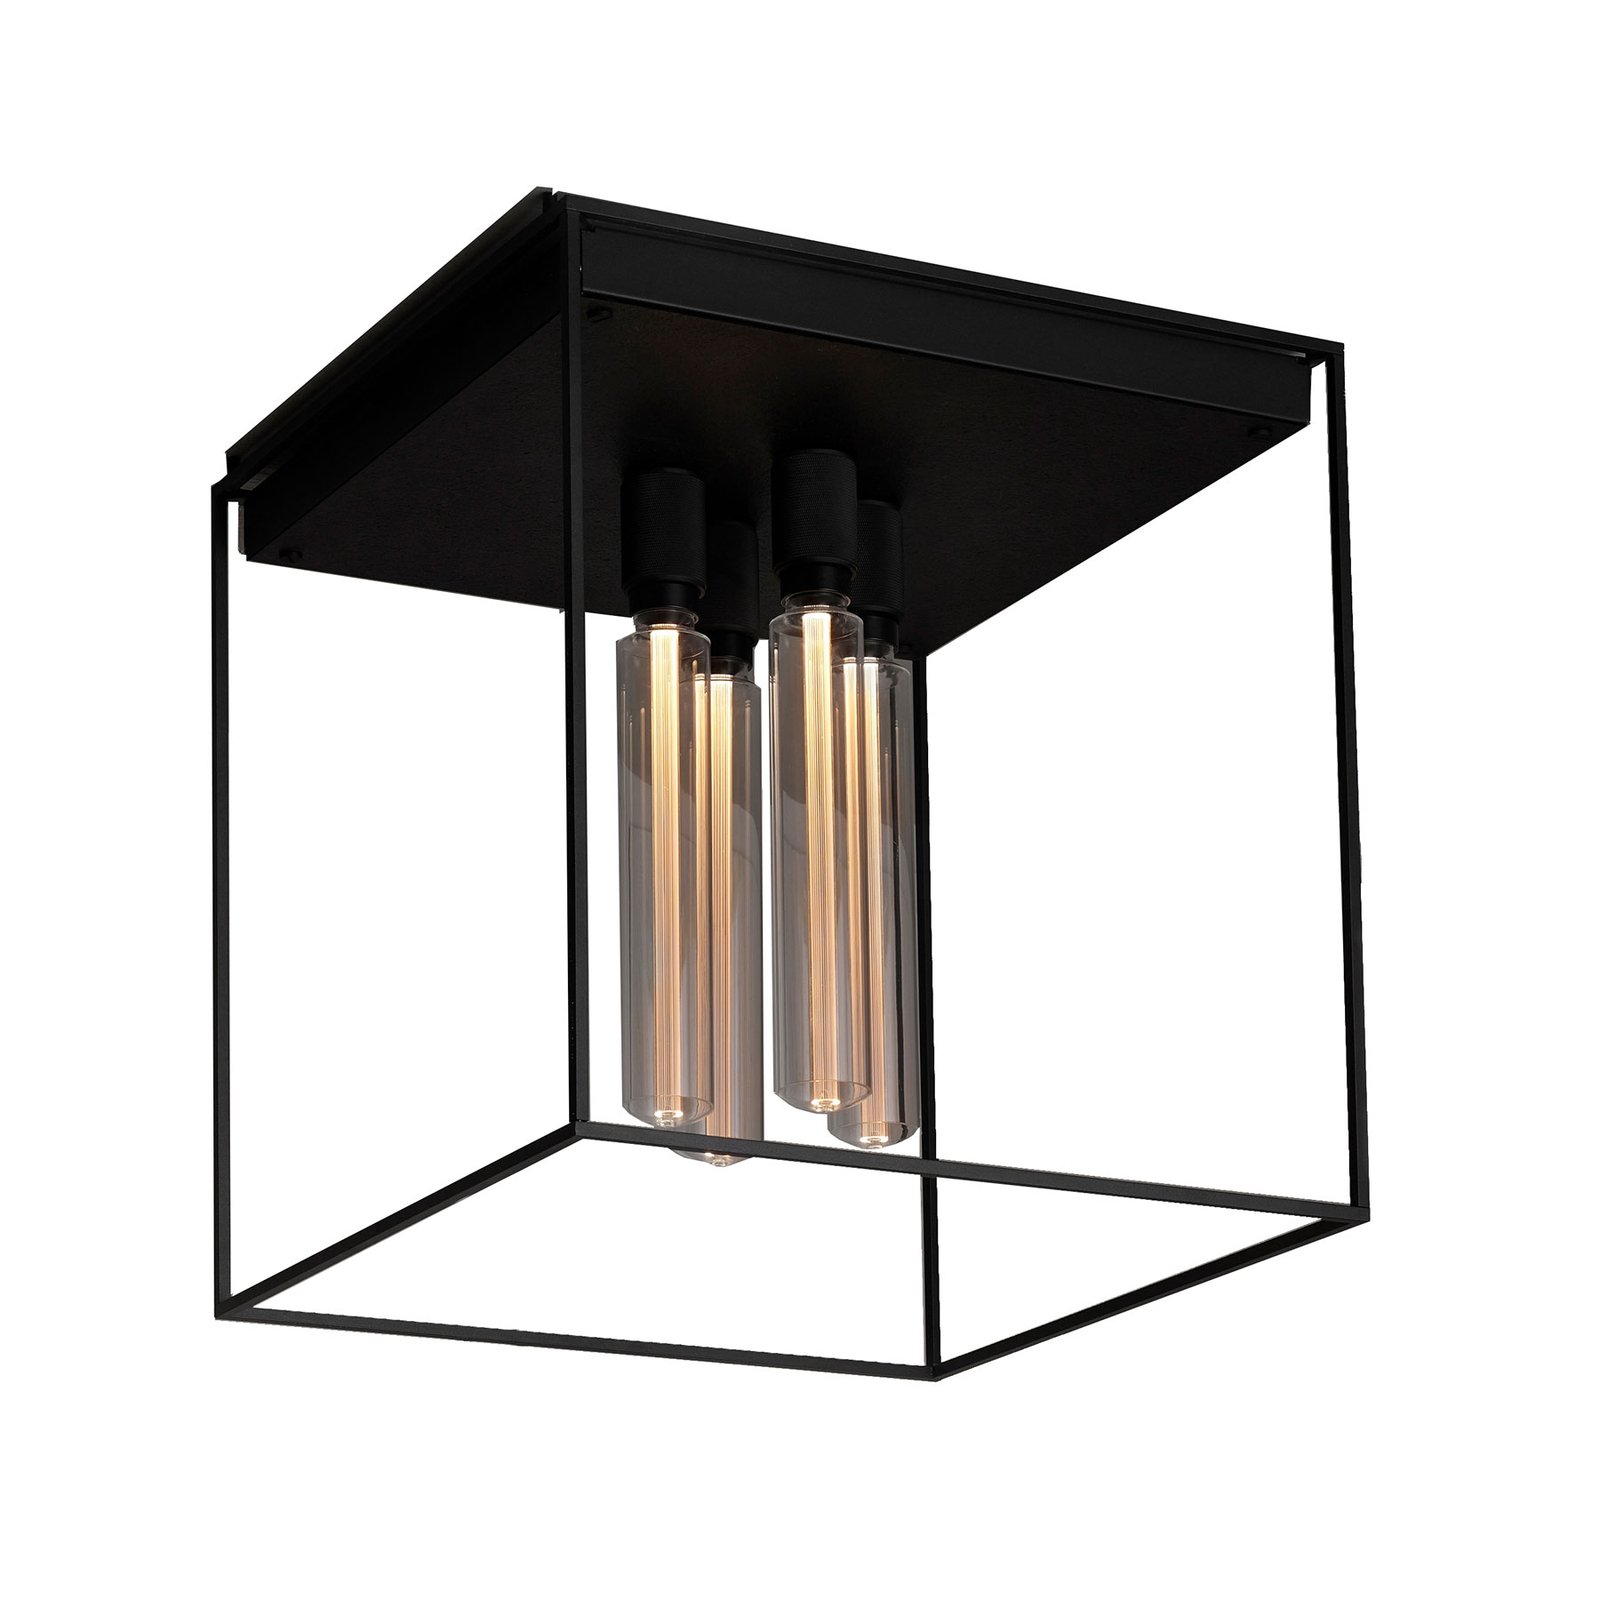 Buster + Punch Caged Ceiling 4.0 LED Marmor black